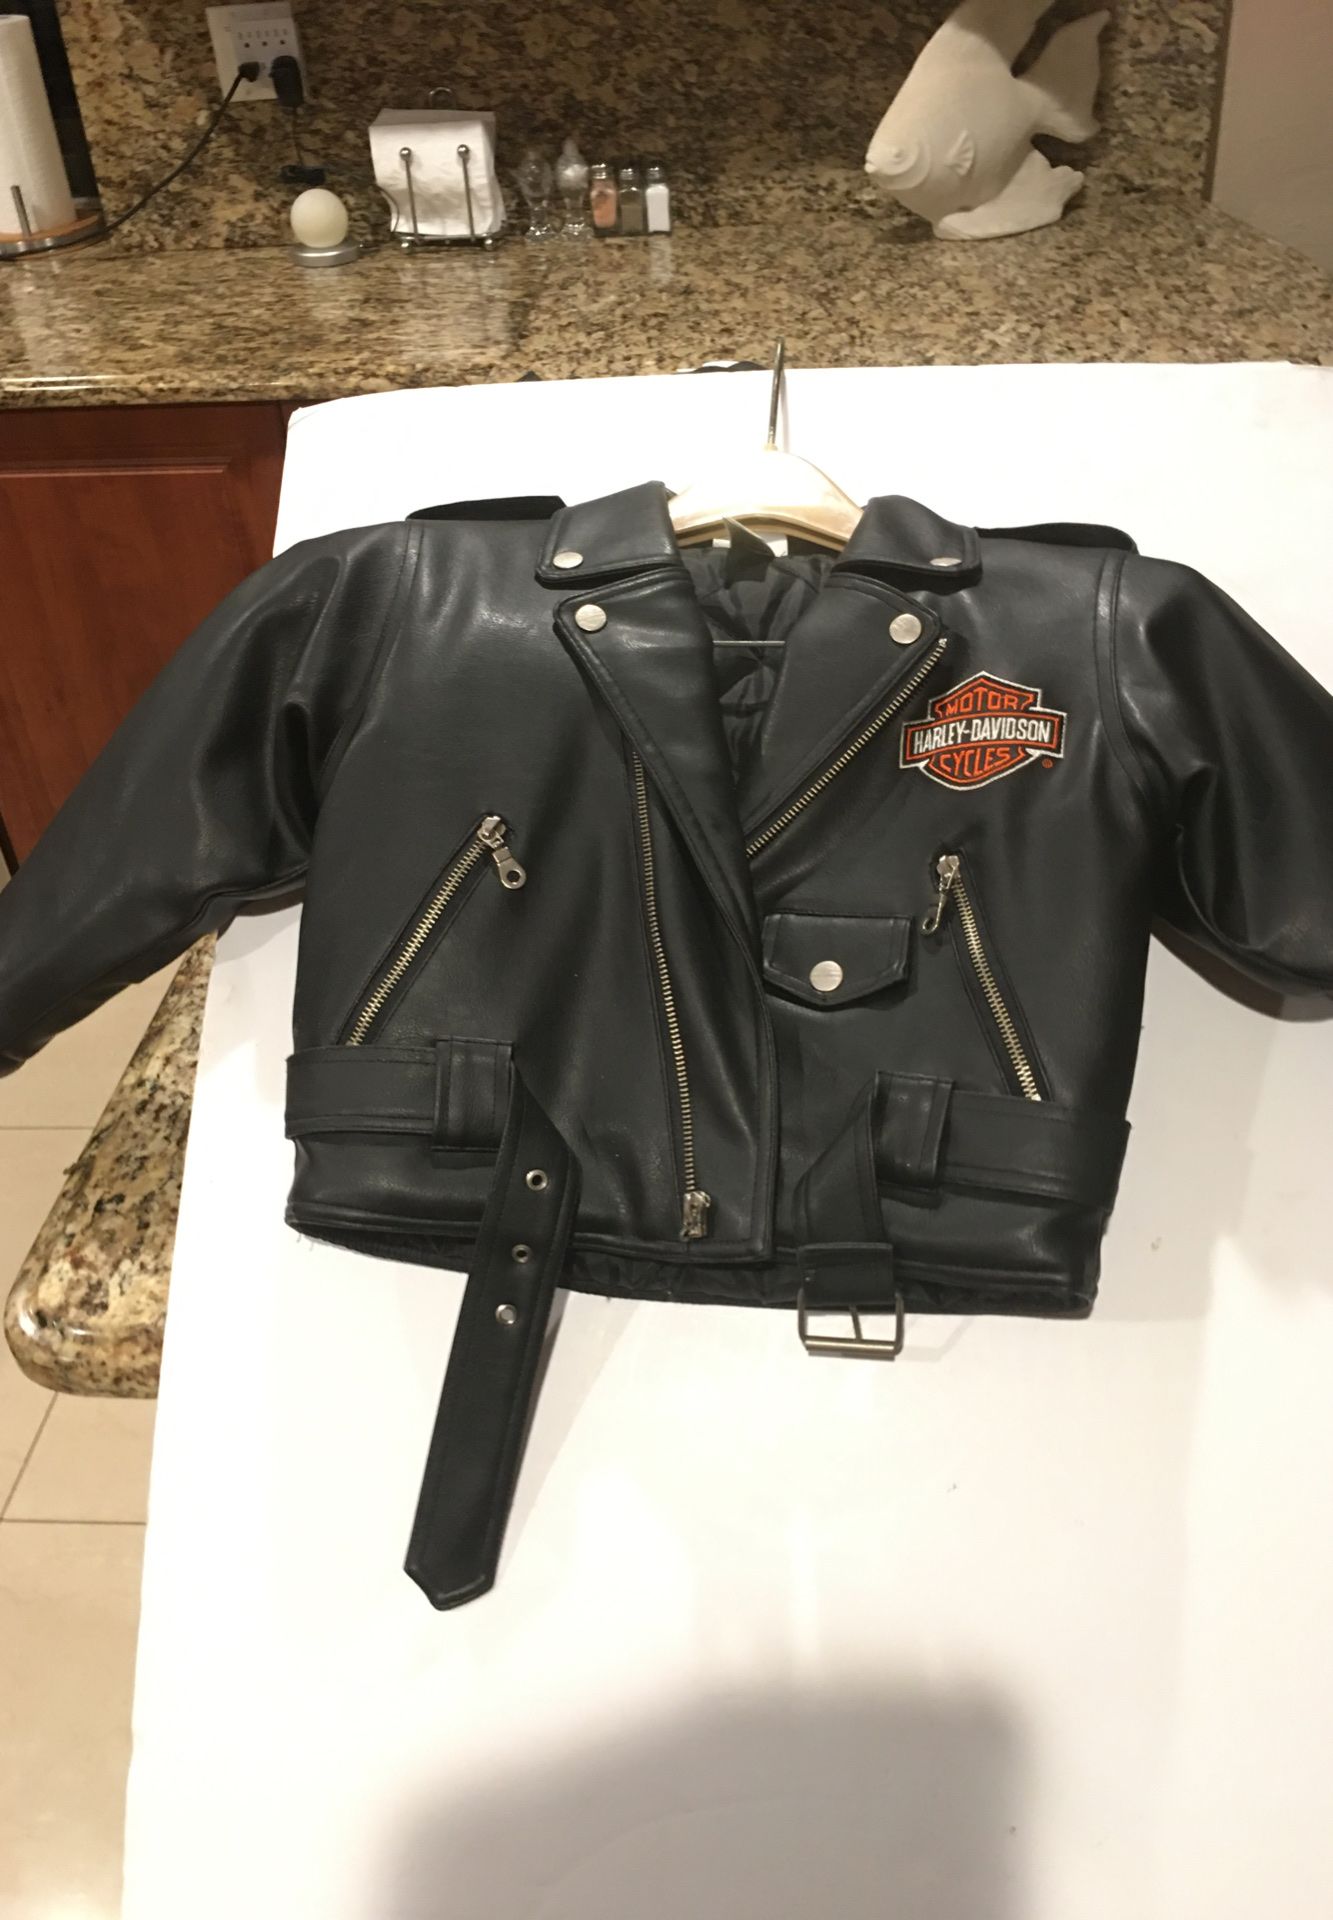 Childs leather Harley Davidson motorcycle jacket, size 5, never worn, excellent condition.